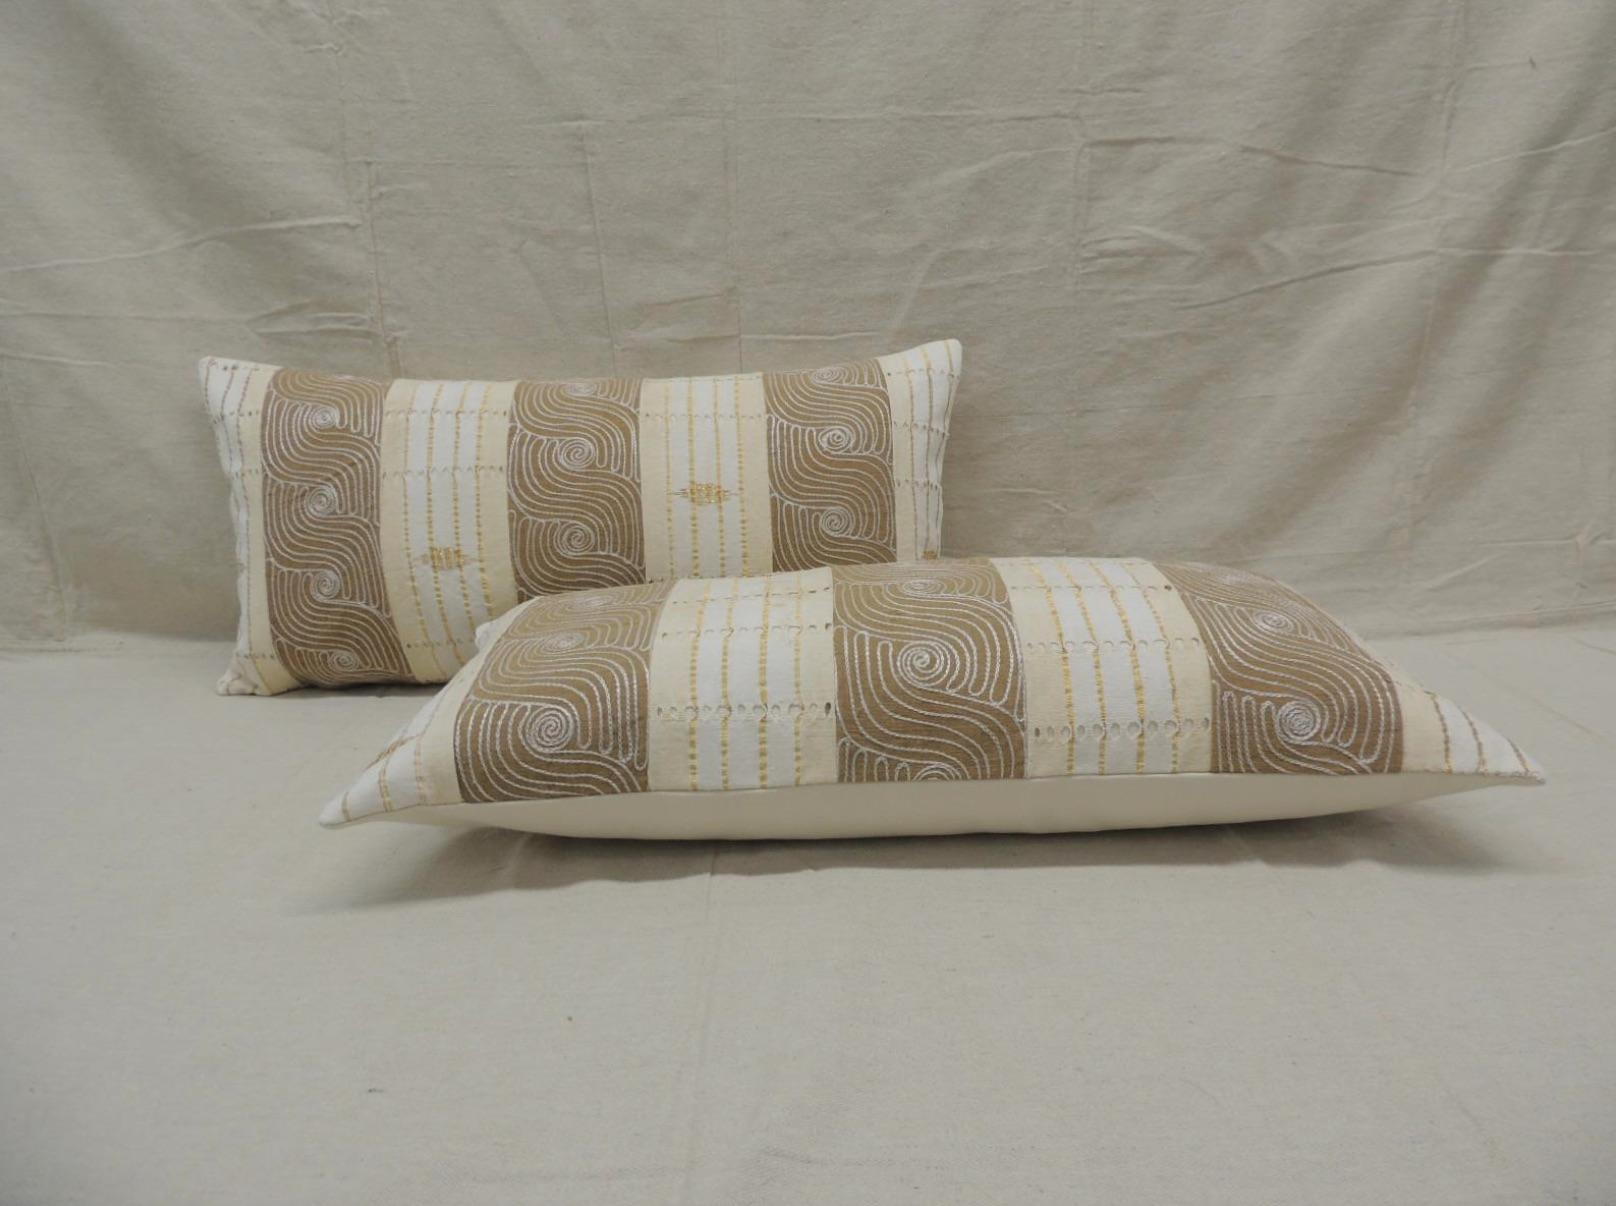 Hand-Crafted Pair of Bolster Pillows in Vintage Tan & Brown African Woven, Ghana 1980's